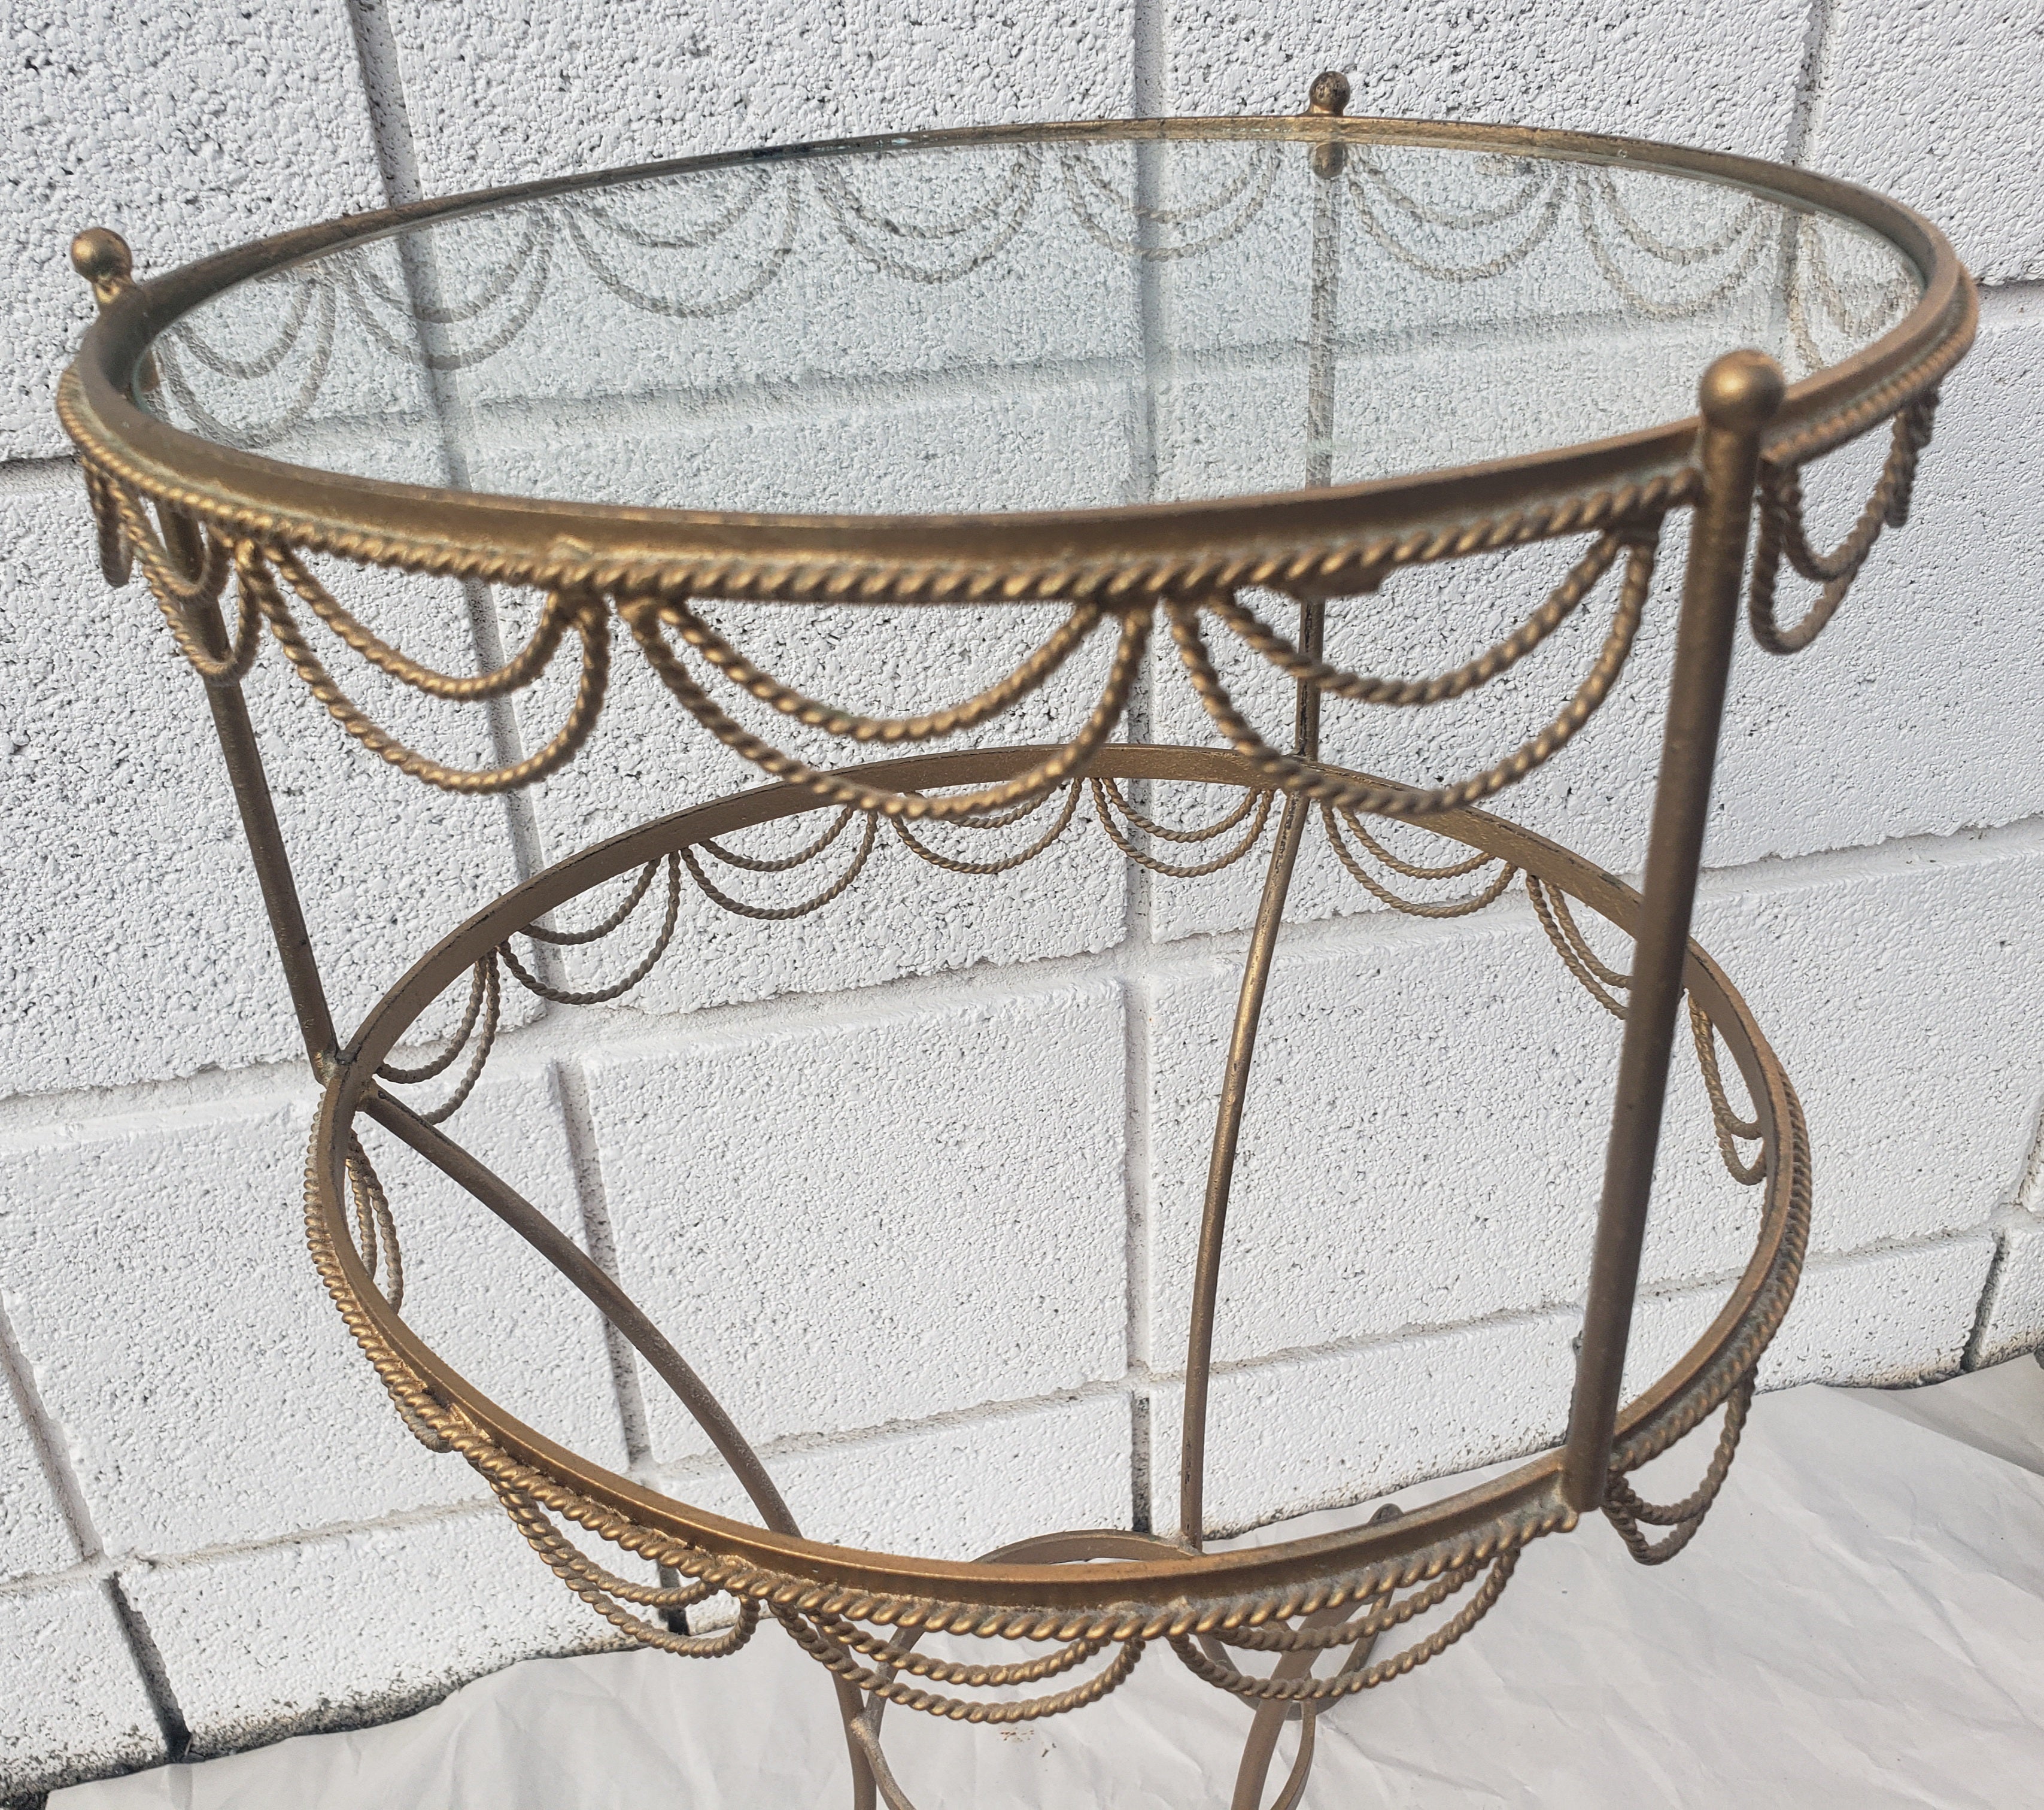 Hollywood Regency Gilt Metal Ornate and Glass Top Candle Stand or Plant Stand. Clean vintage condition.
Measure 15